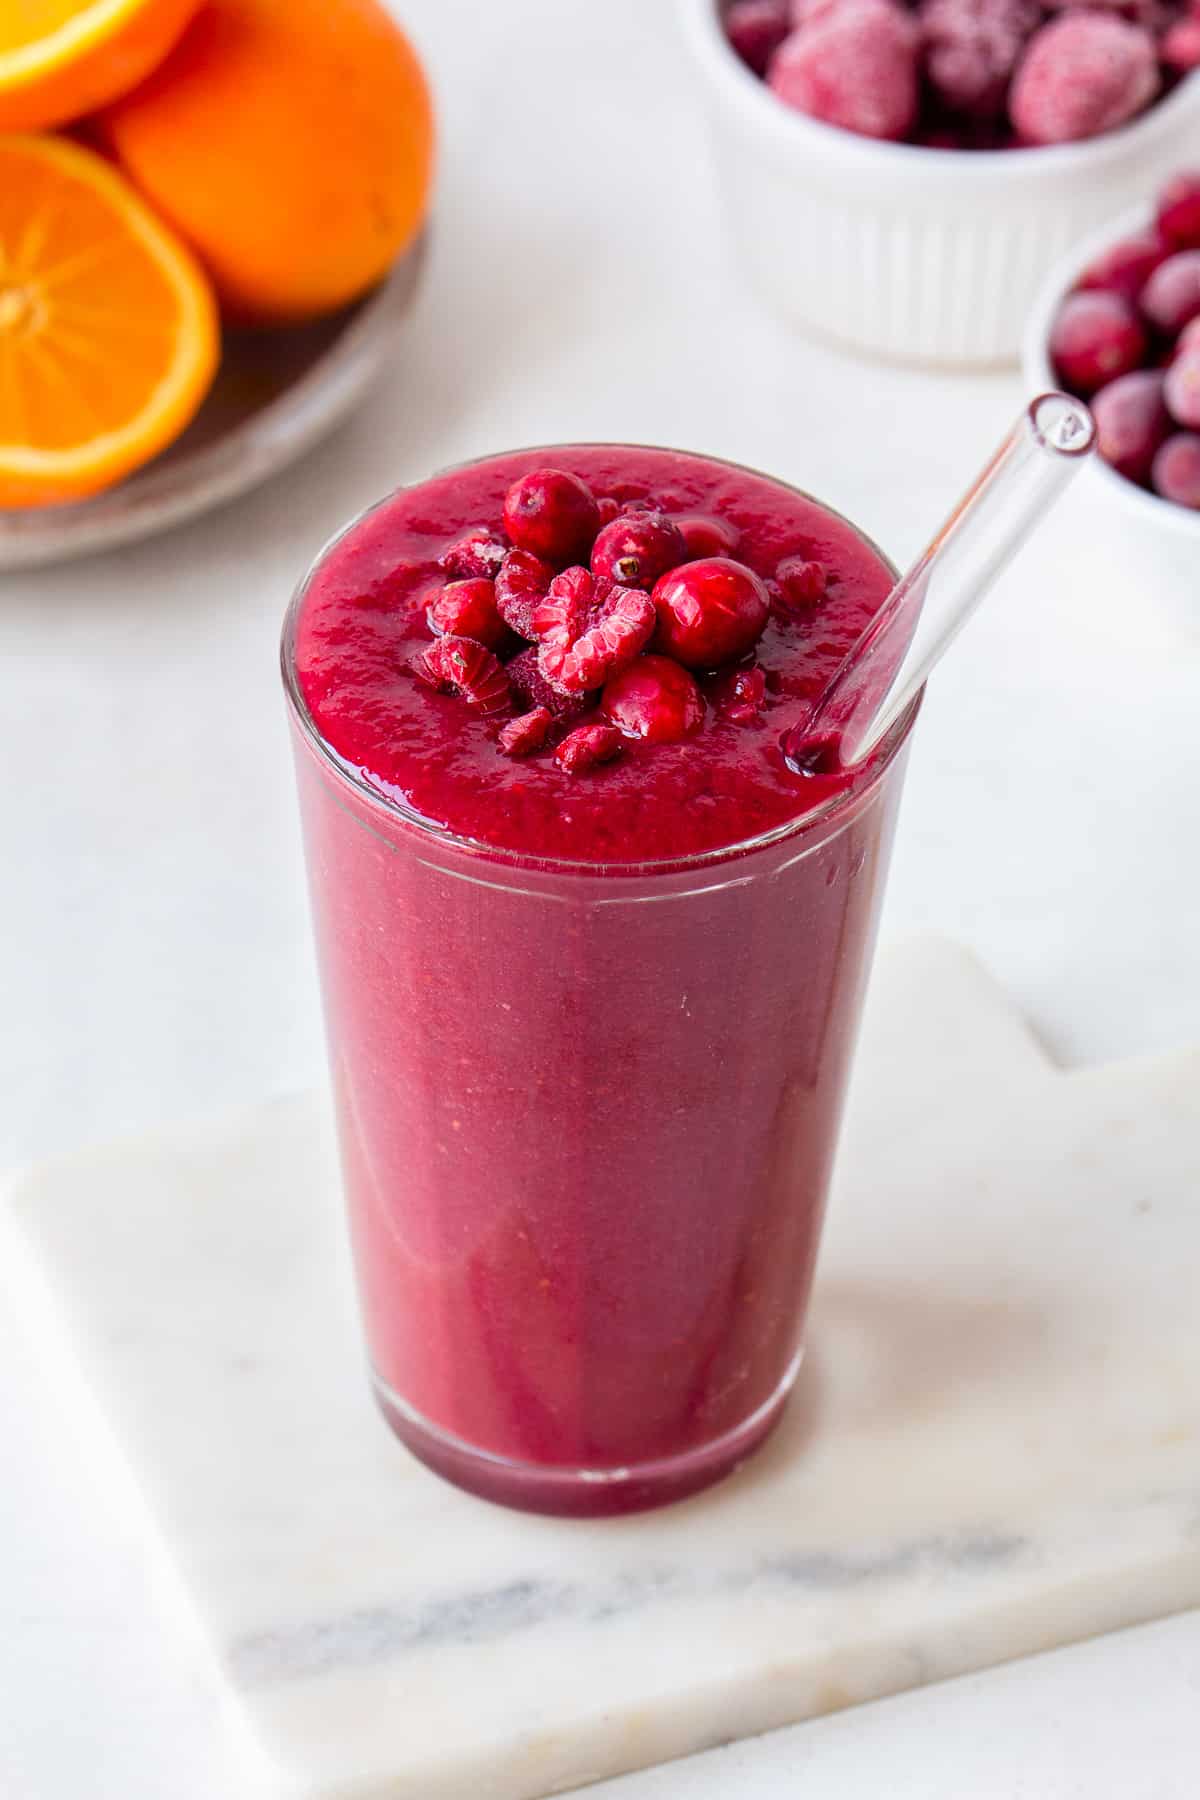 Pink smoothie topped with raspberries and cranberries with oranges in the background.